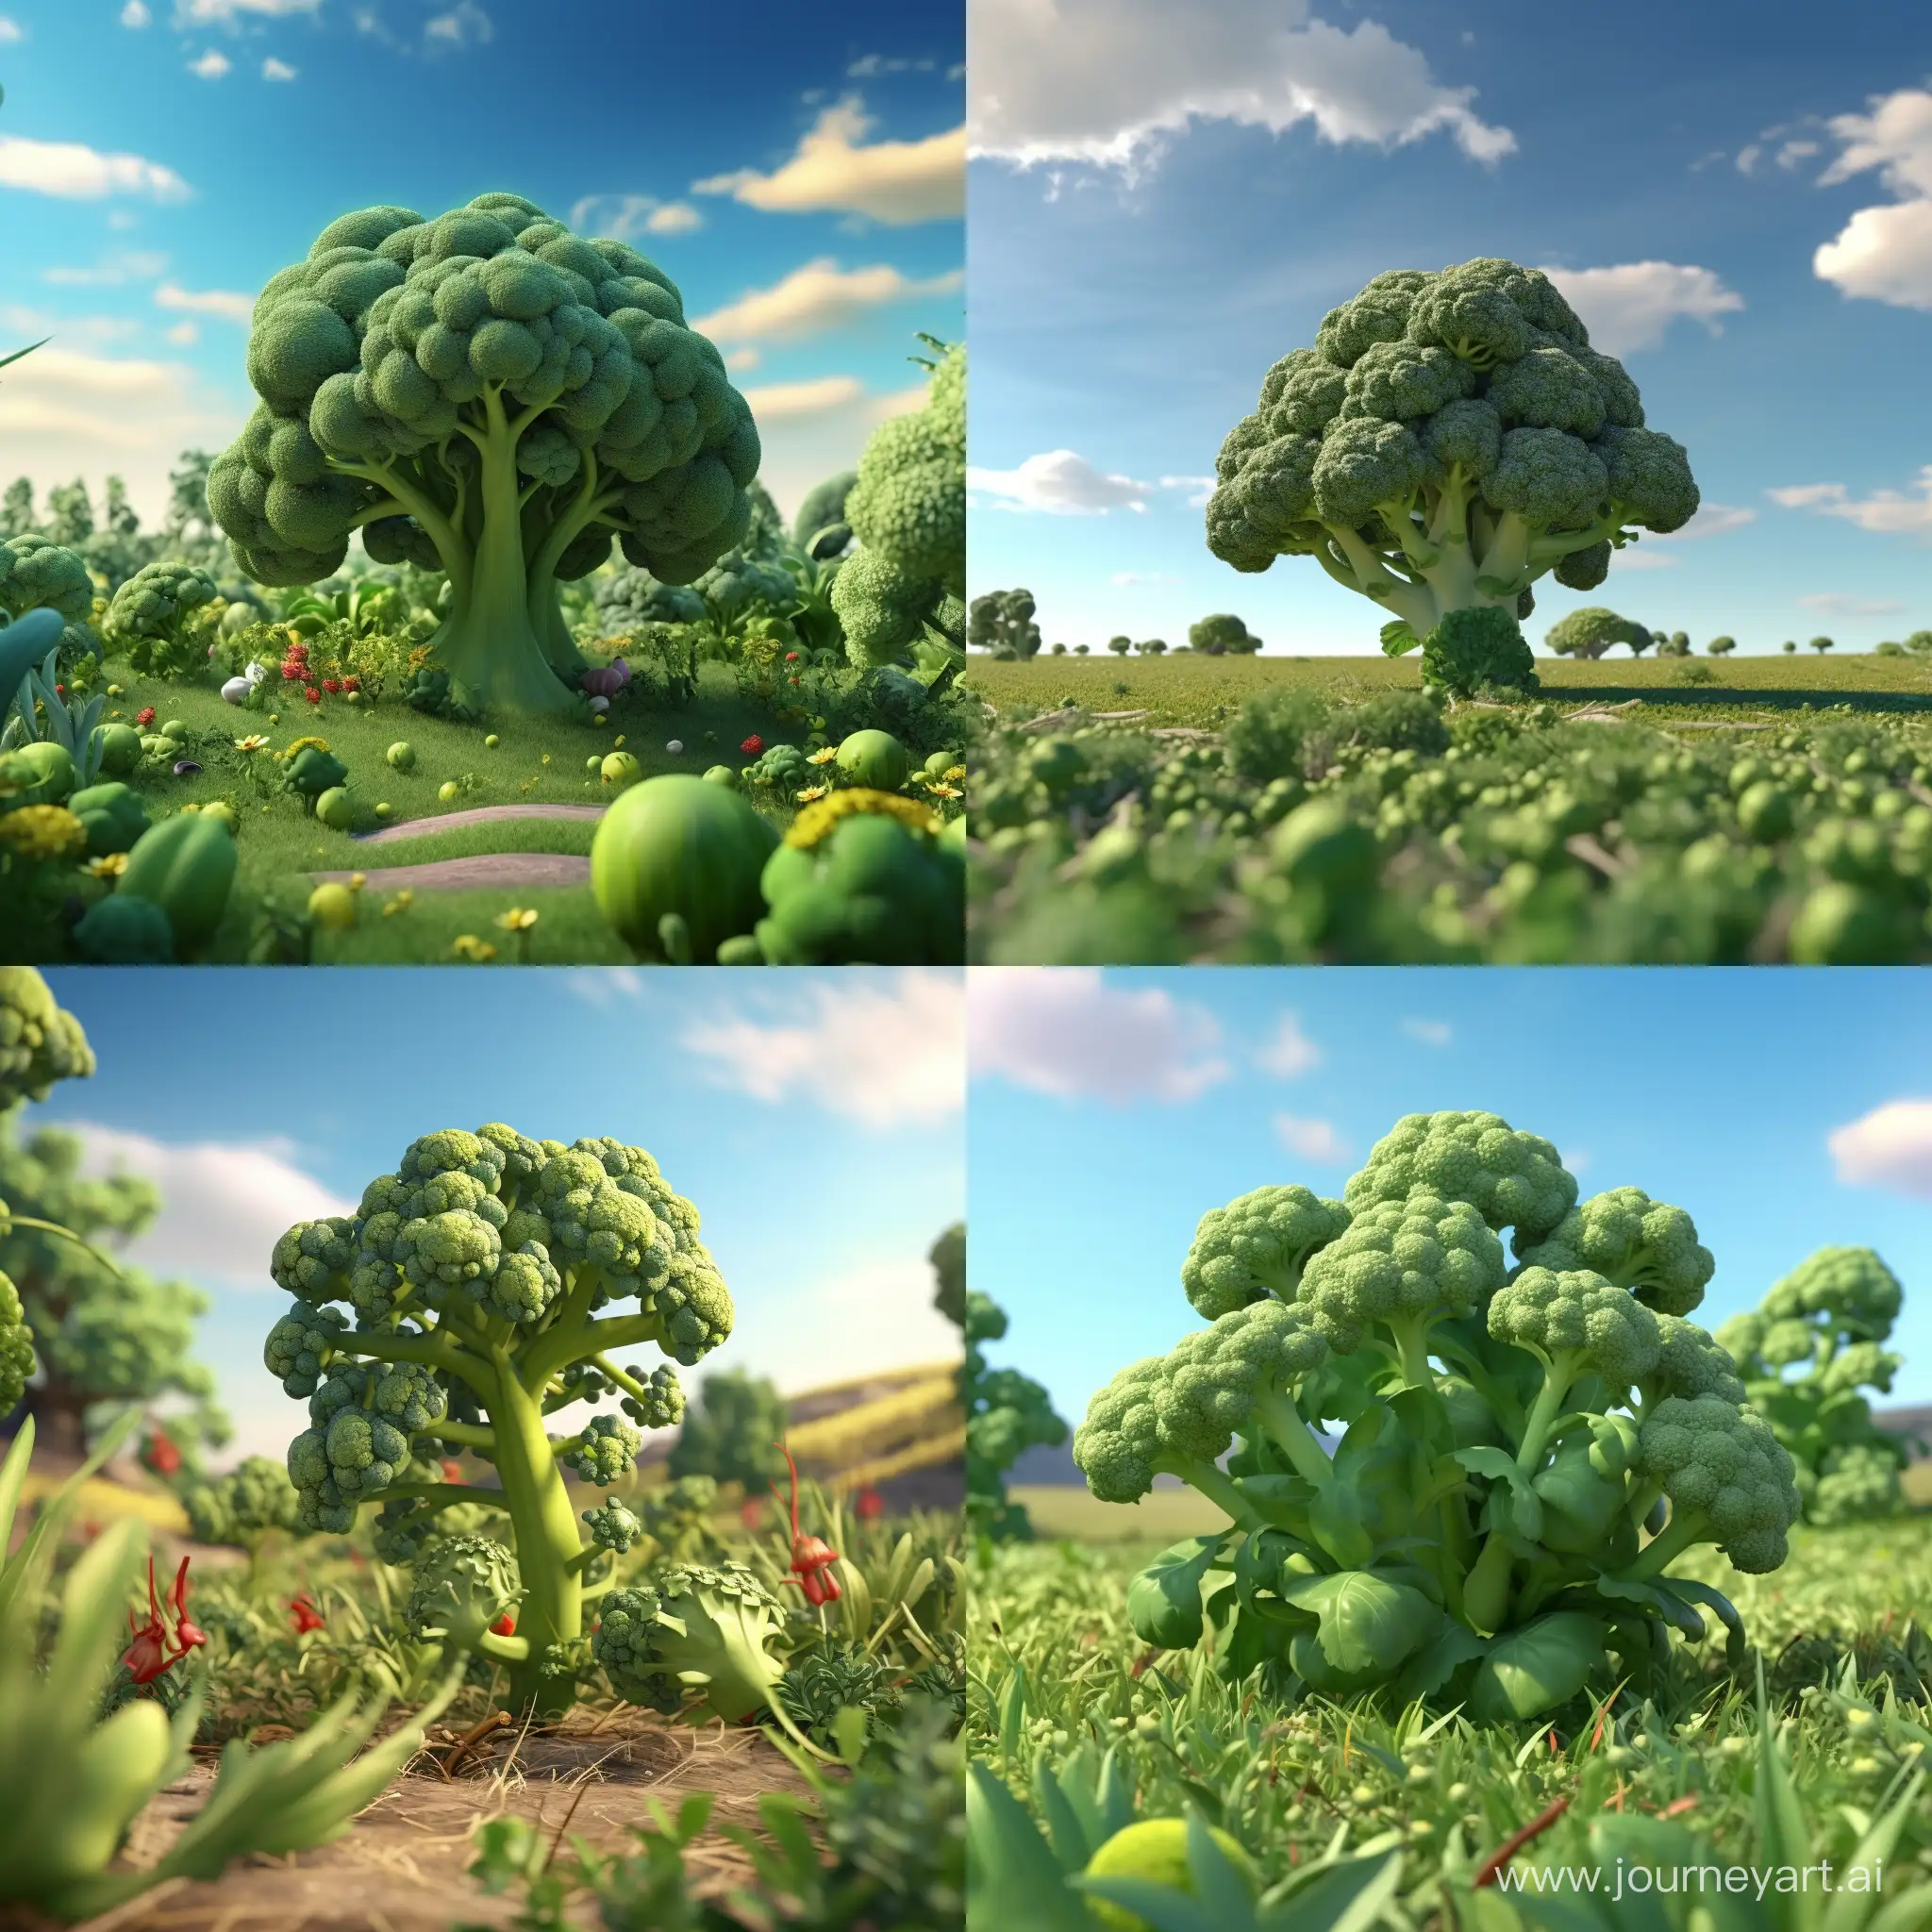 There are a lot of huge broccoli growing in the meadow. 3D animation 